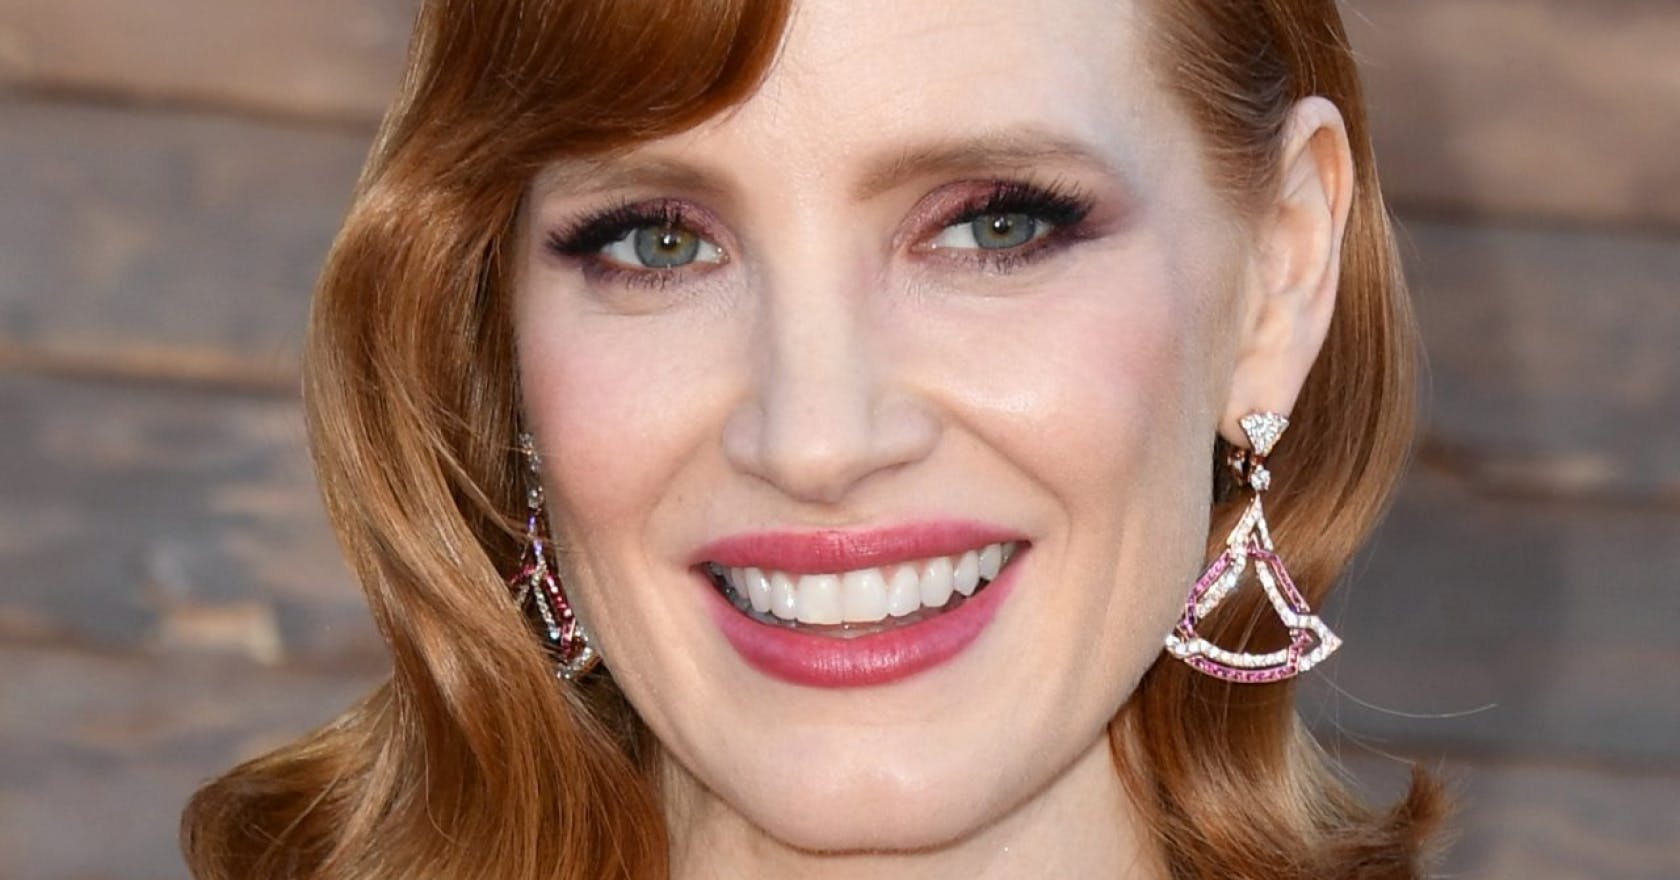 Scenes From A Marriage: Jessica Chastain’s new series is a must-see for fans of The Affair